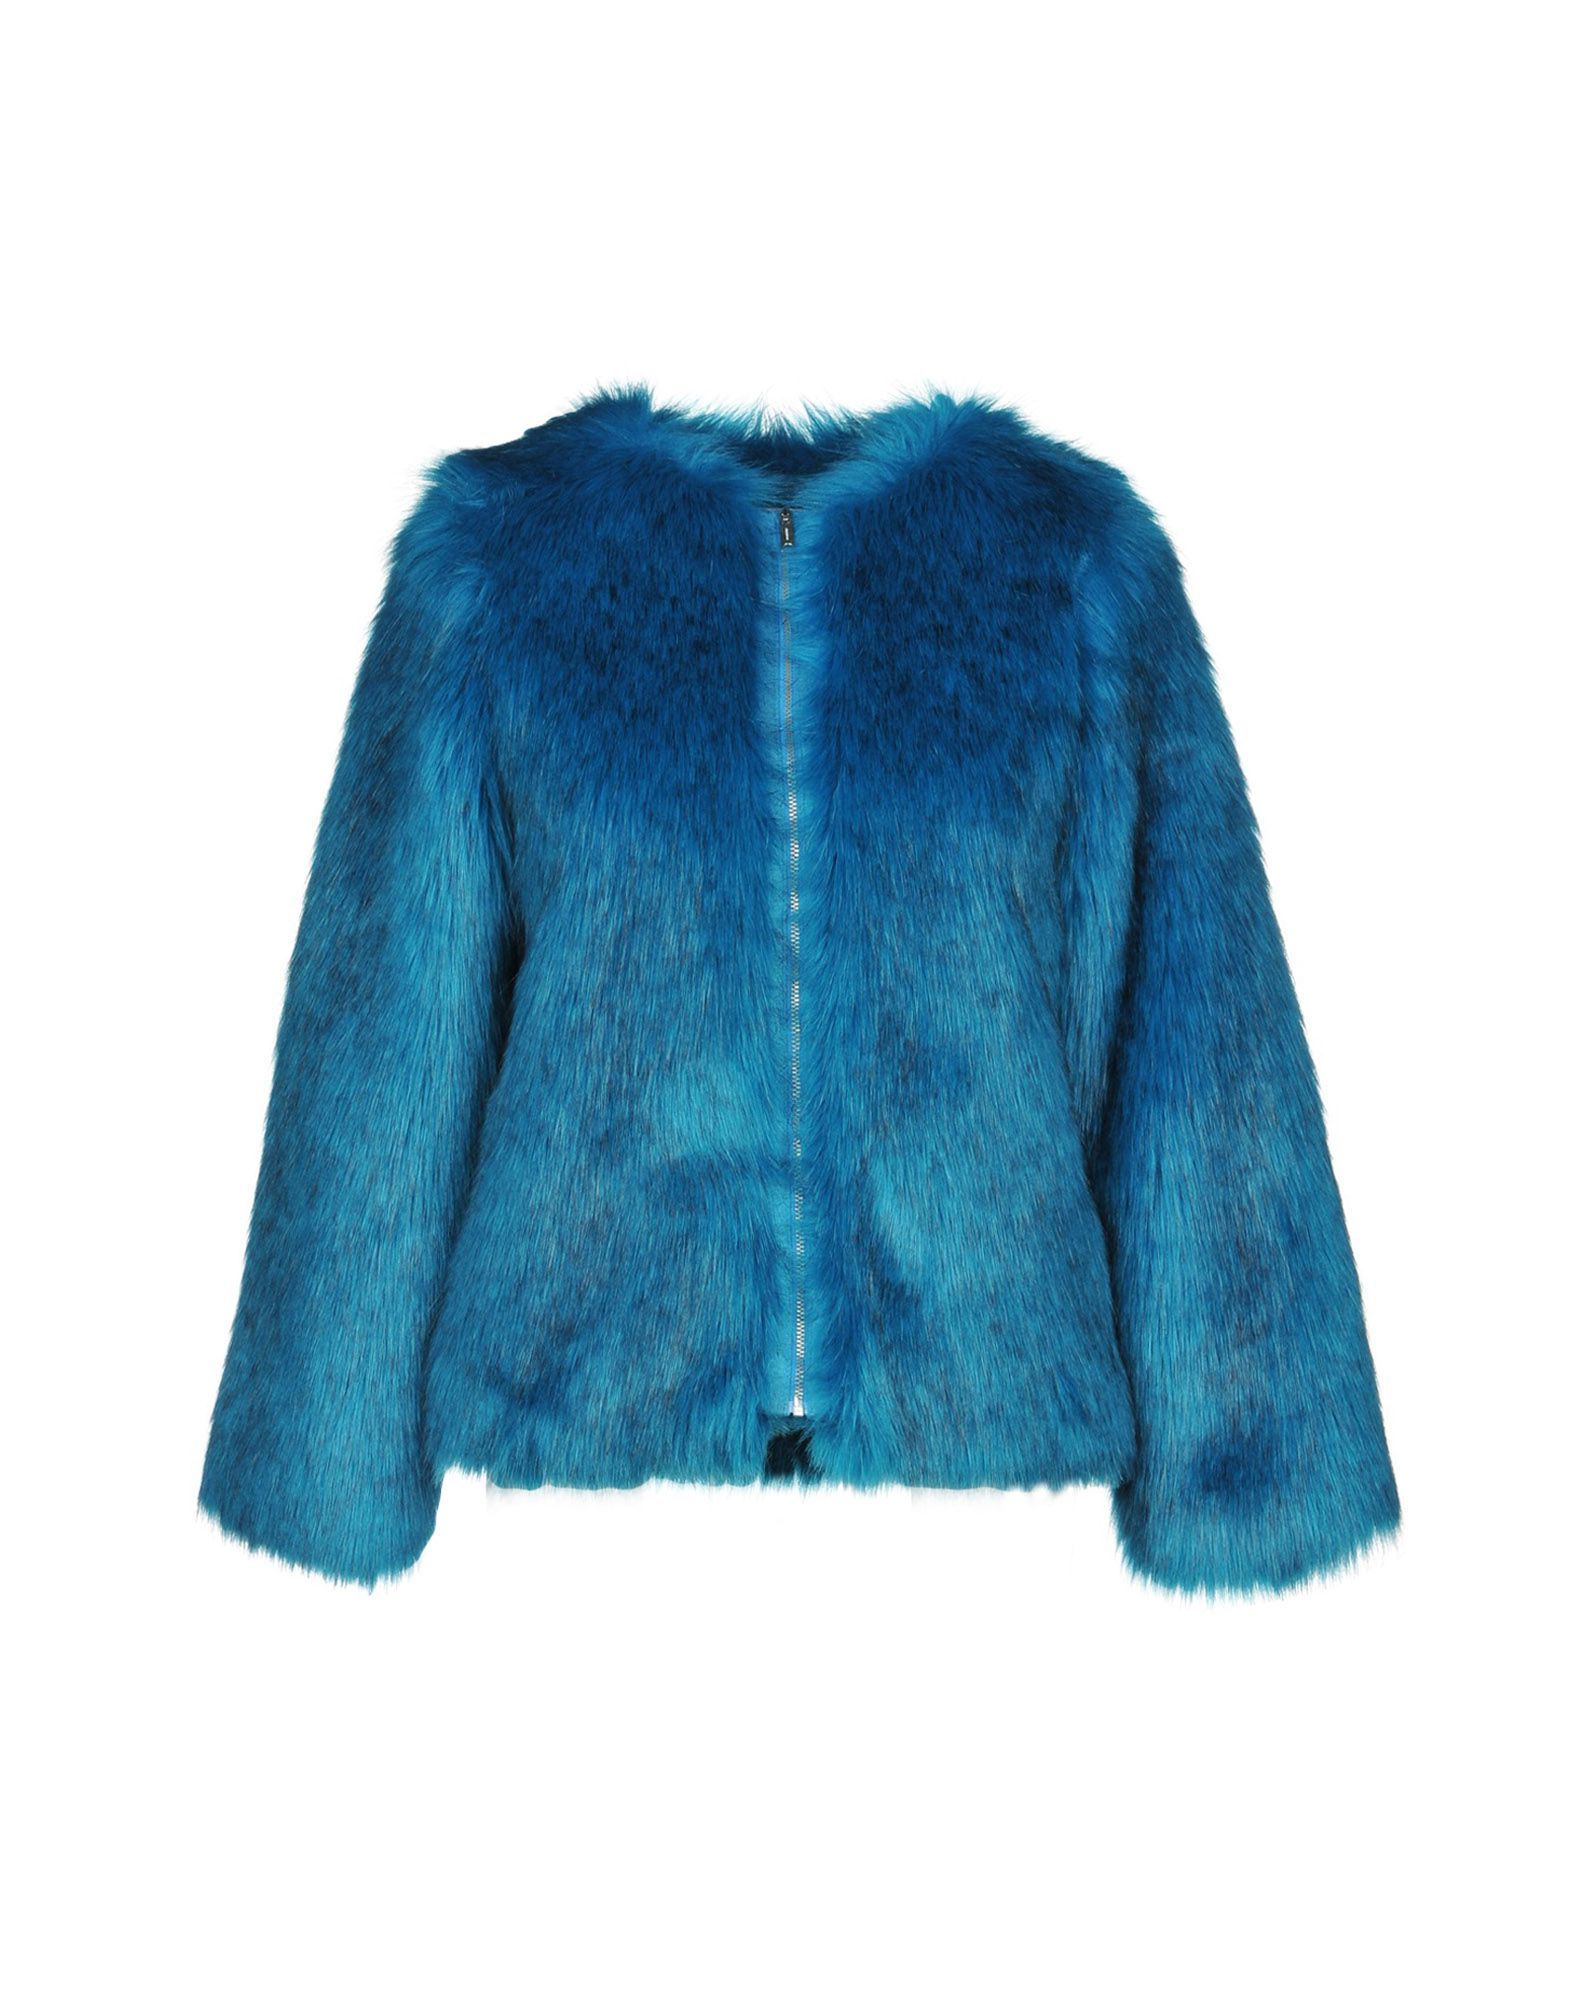 faux fur, no appliqu�s, two-tone, single-breasted , zip, round collar, multipockets, long sleeves, fully lined, single-breasted jacket